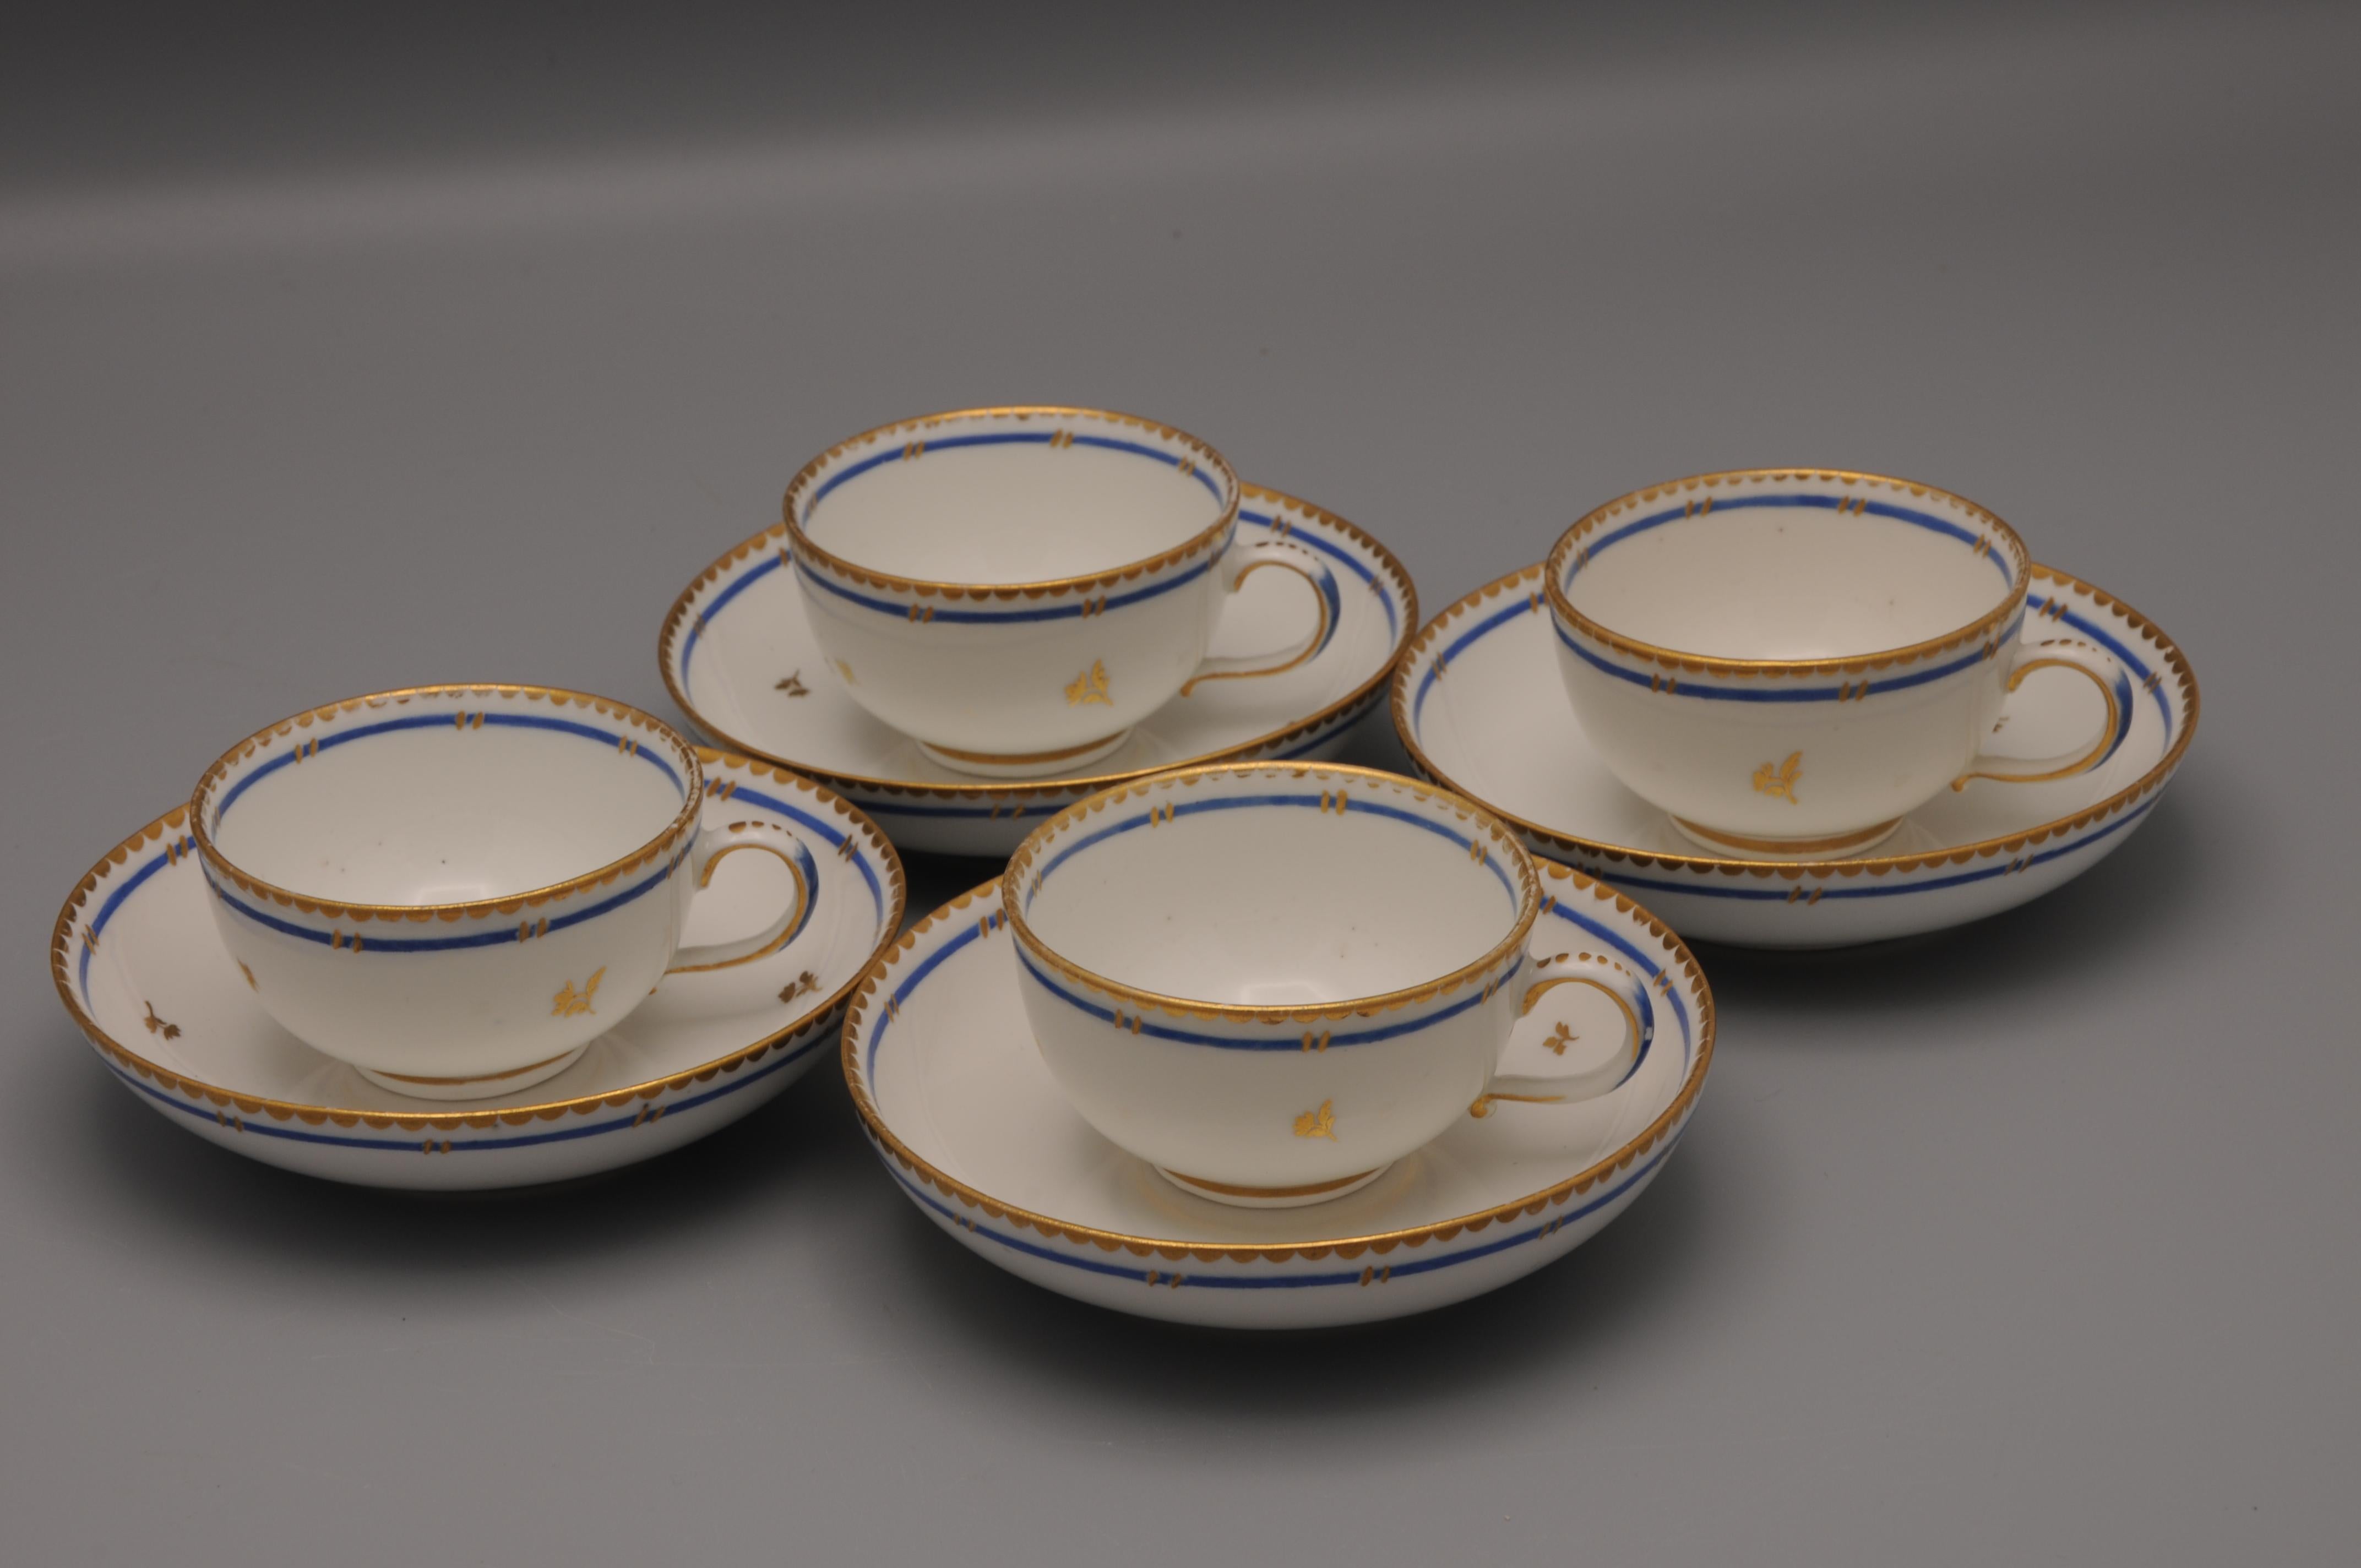 Set of 4 cups and saucers with decoration of gilt flower sprays and blue border by the Kaiserlich priviglierte Porzellan Fabrique in Vienna. It was founded in 1718 and continued until 1864.

The firm was Europe's second-oldest porcelain factory